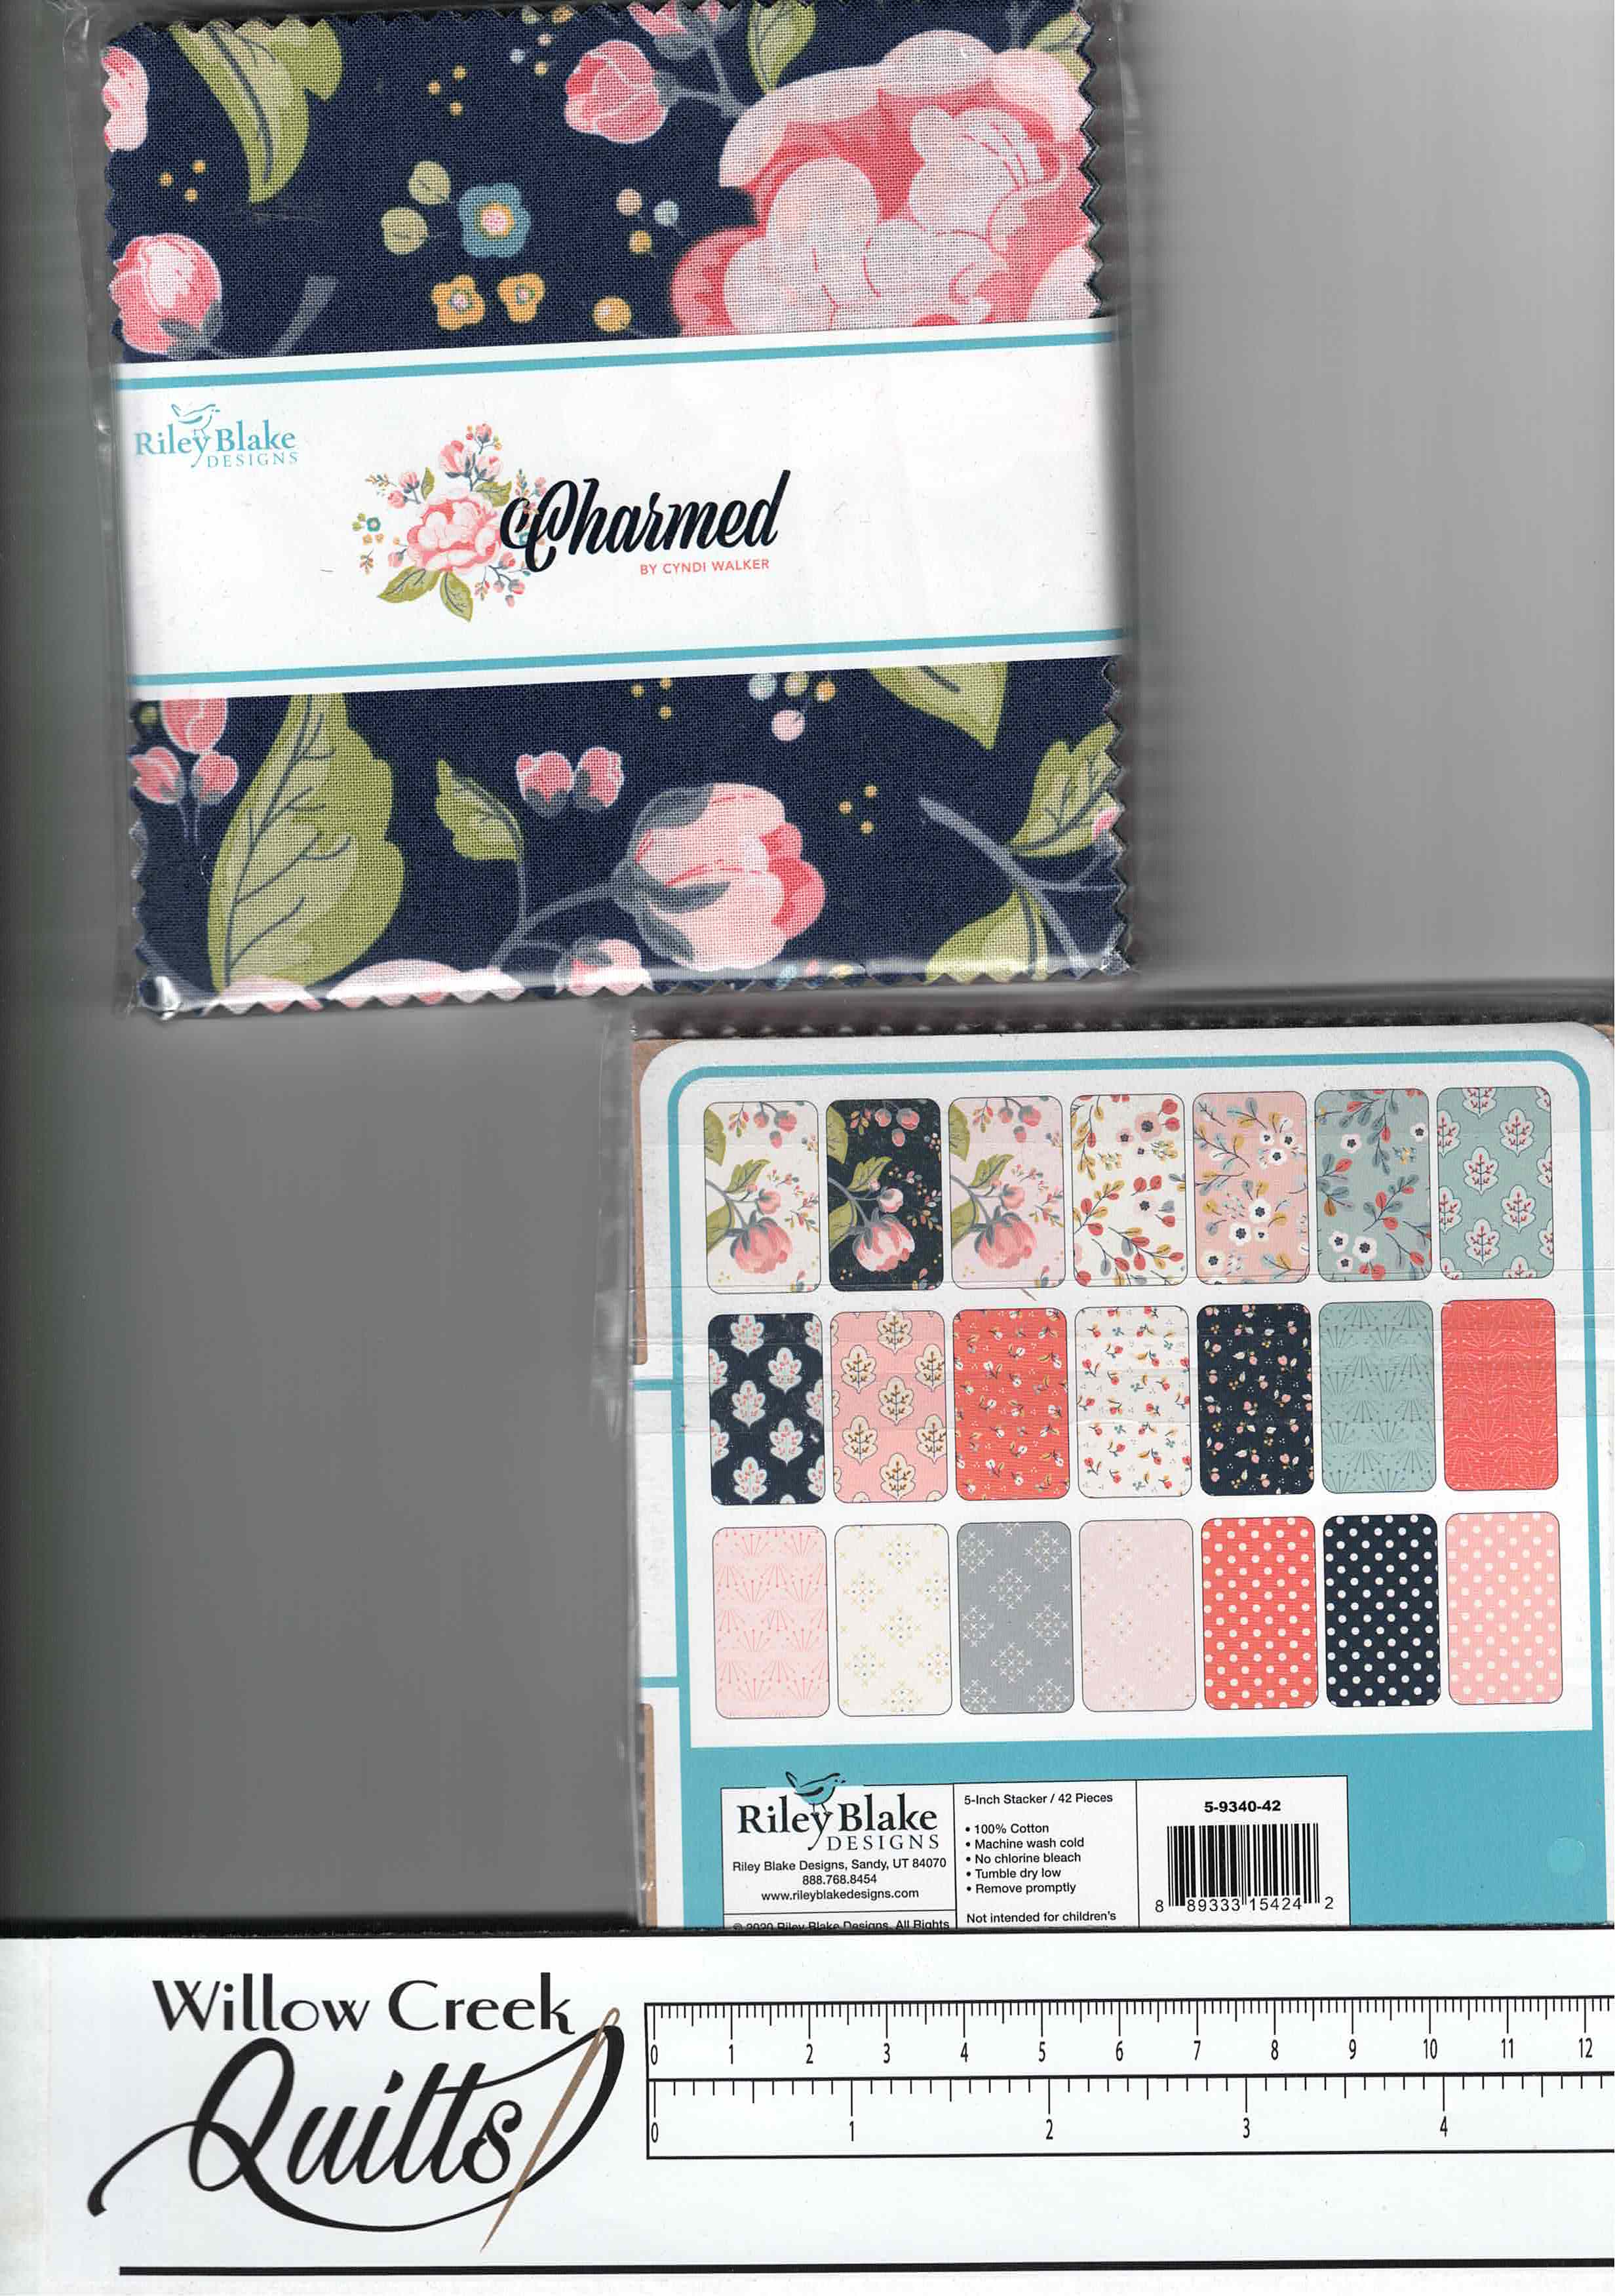 Charmed - 5" squares - charm pack - 5-9340-42